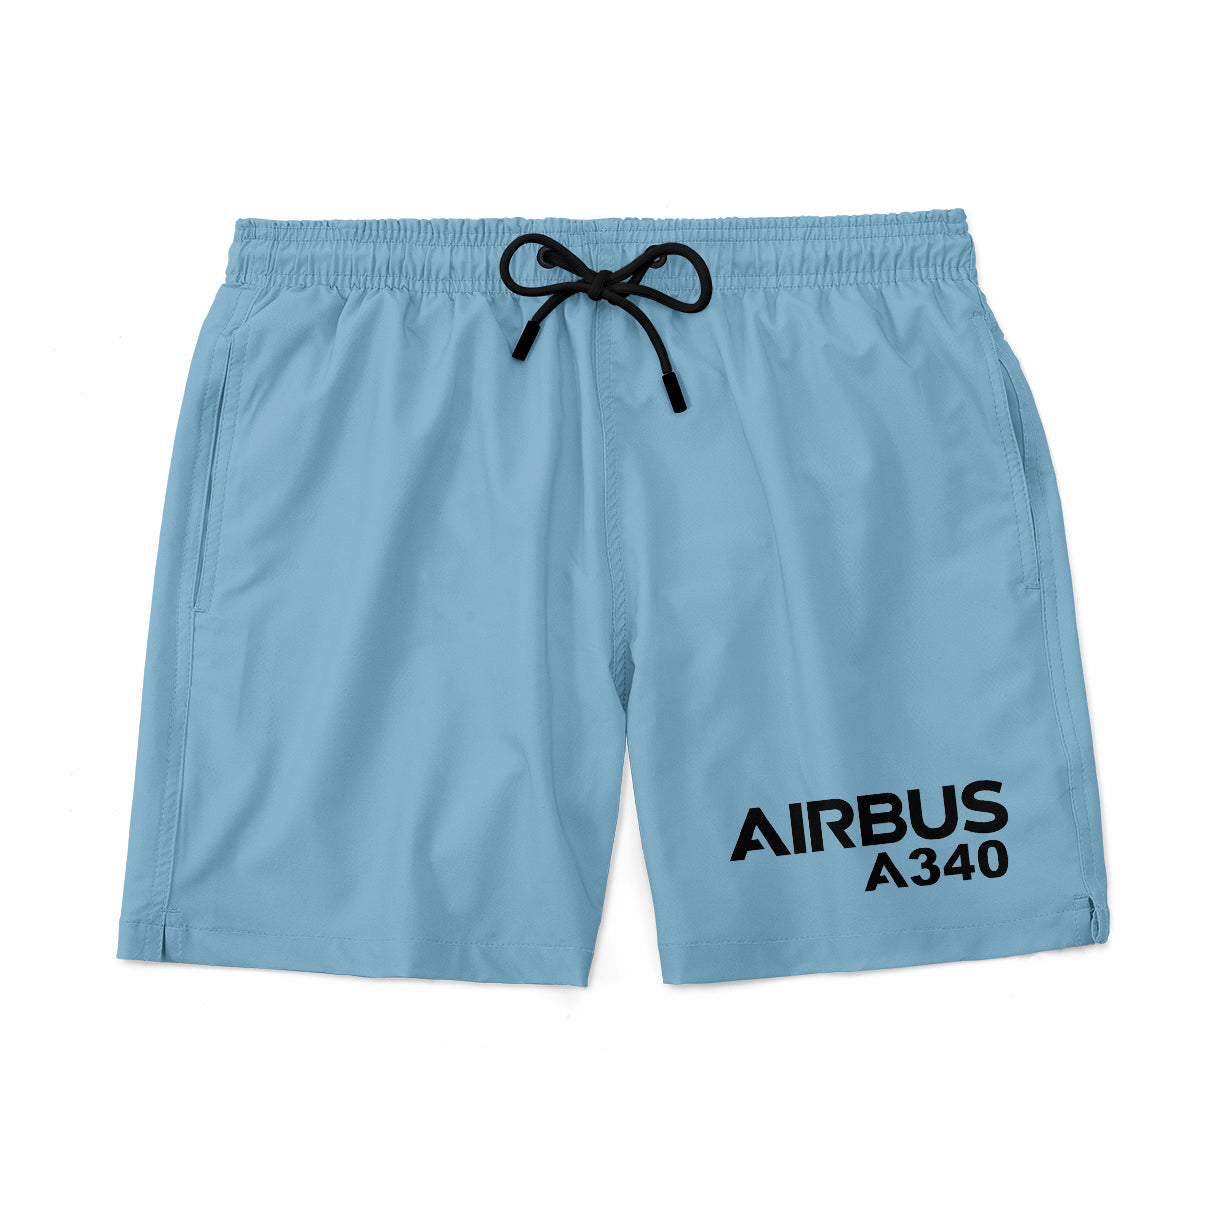 Airbus A340 & Text Designed Swim Trunks & Shorts